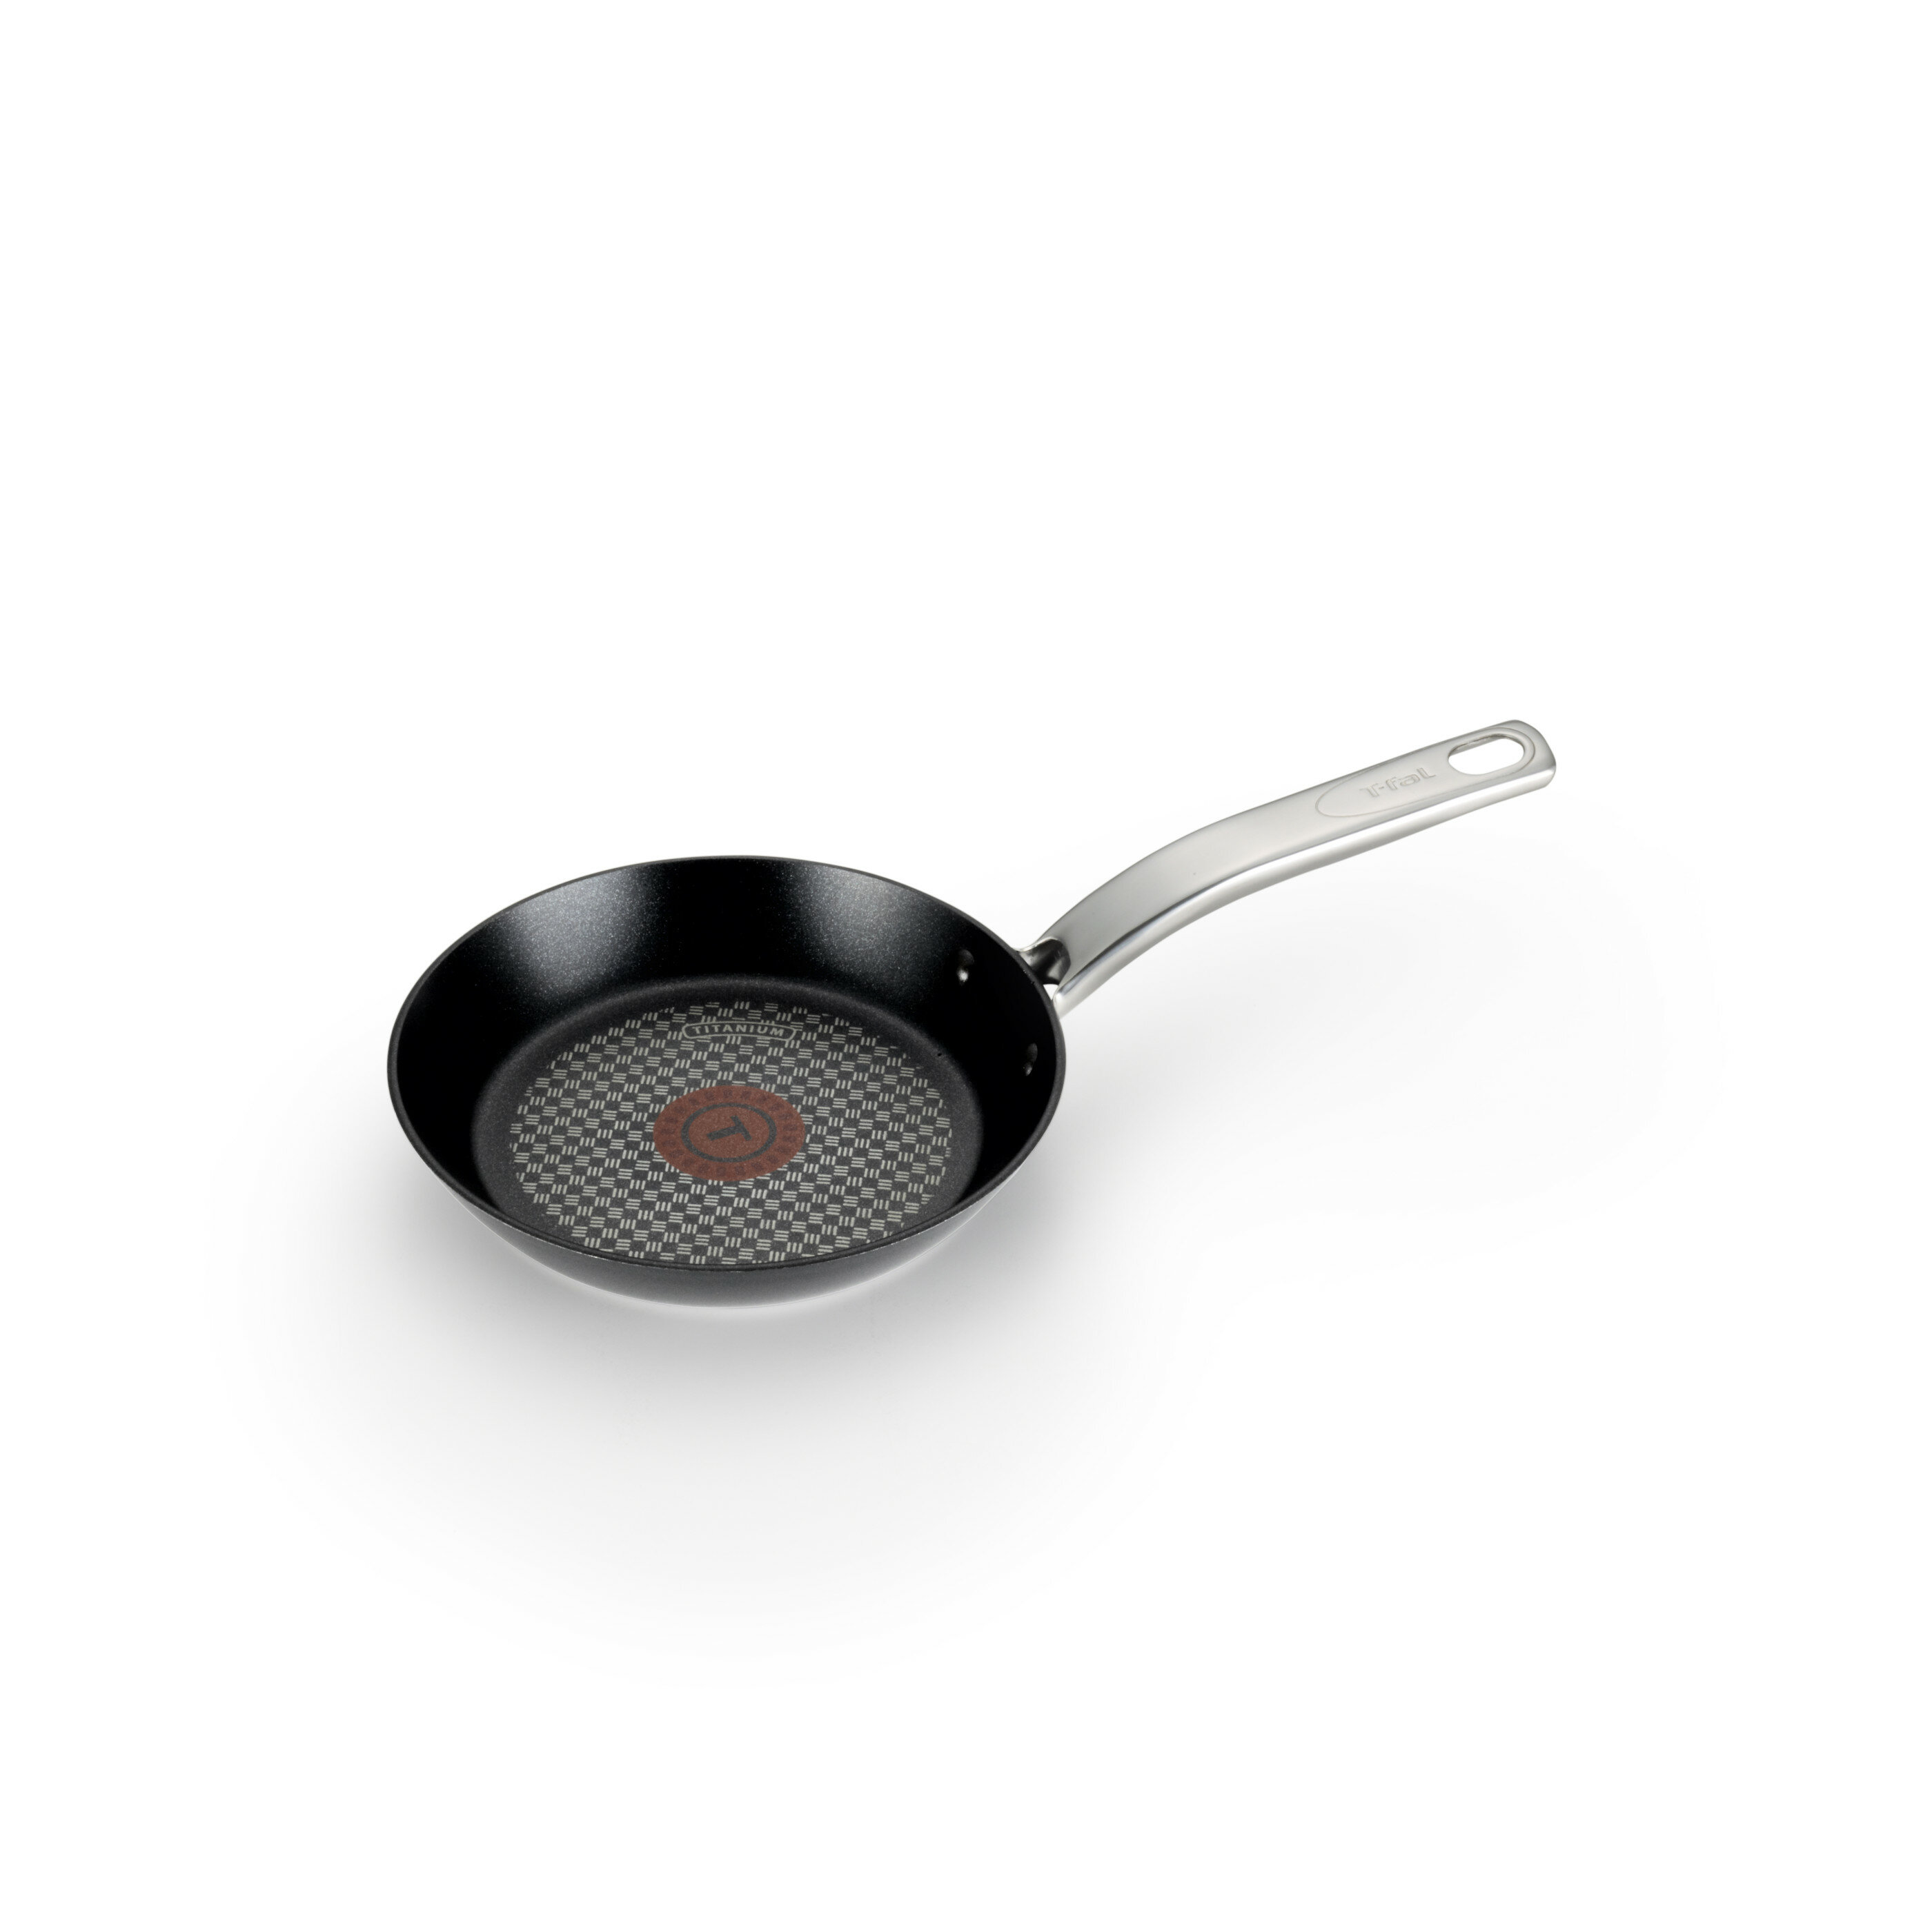 Tefal Premium Specialty 30 cm Hard Anodised Induction Chef Pan